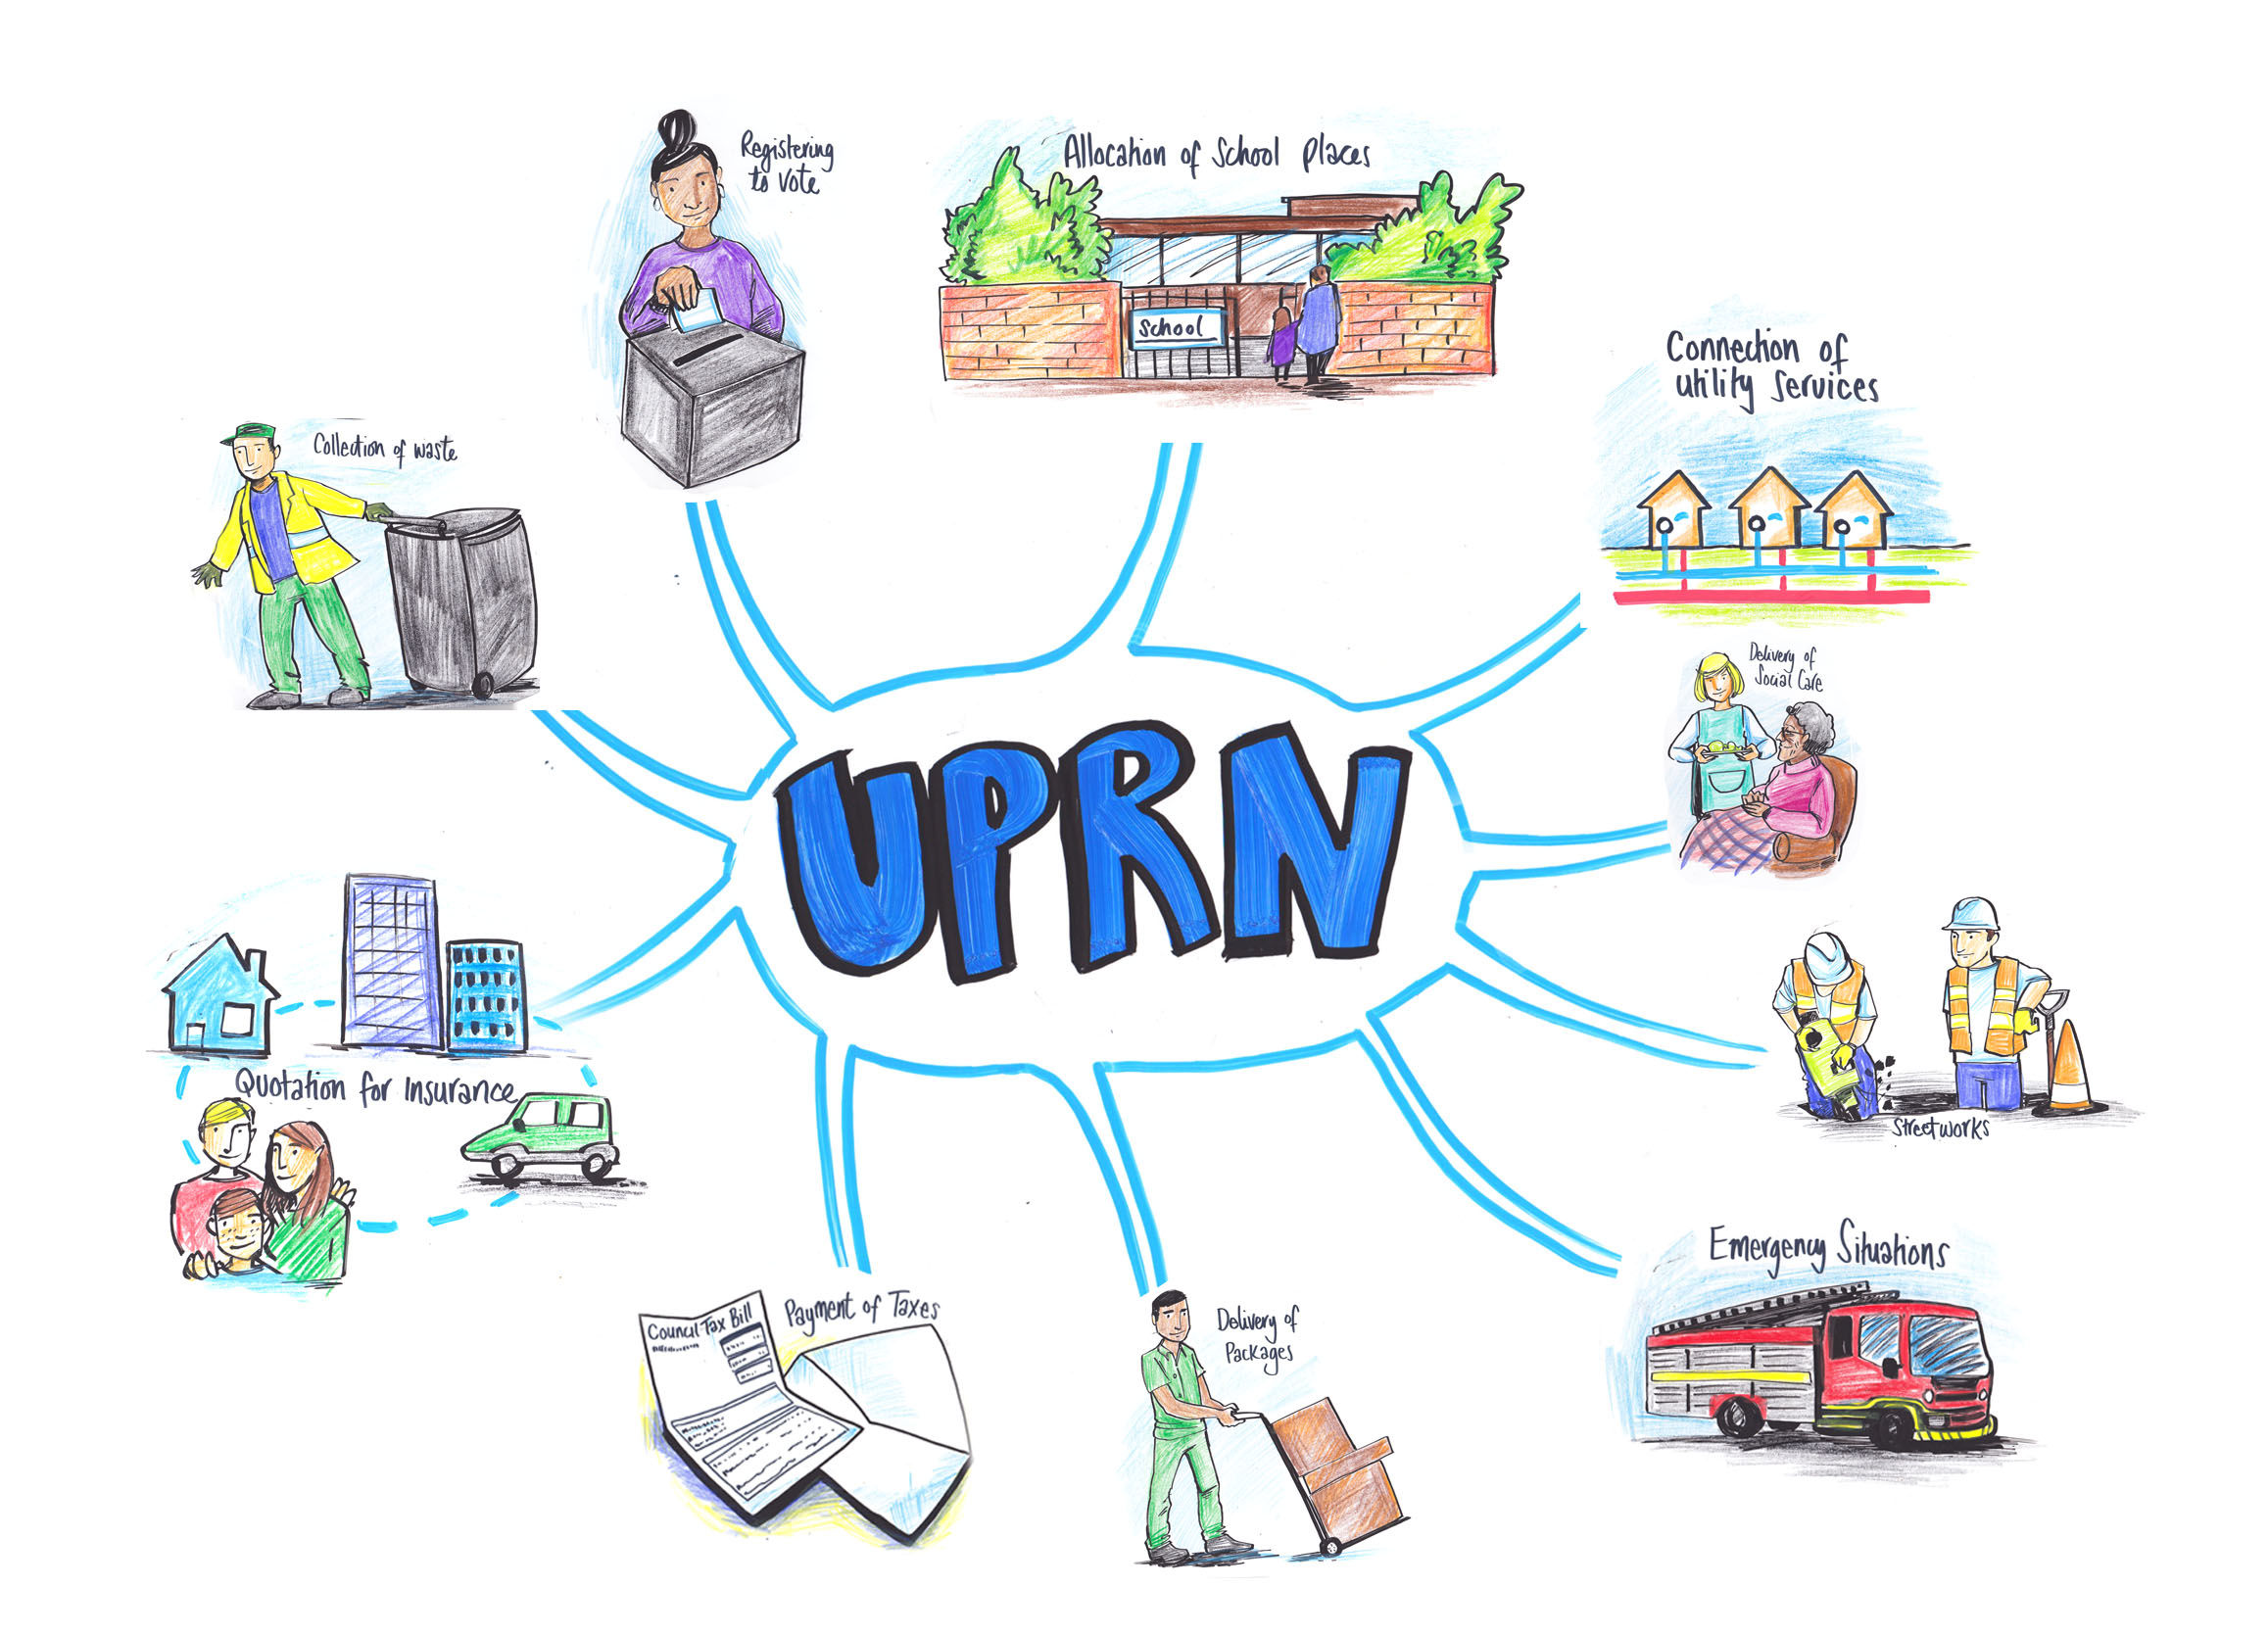 Illustration of how the Unique Property Reference Number (UPRN) helps to join up services